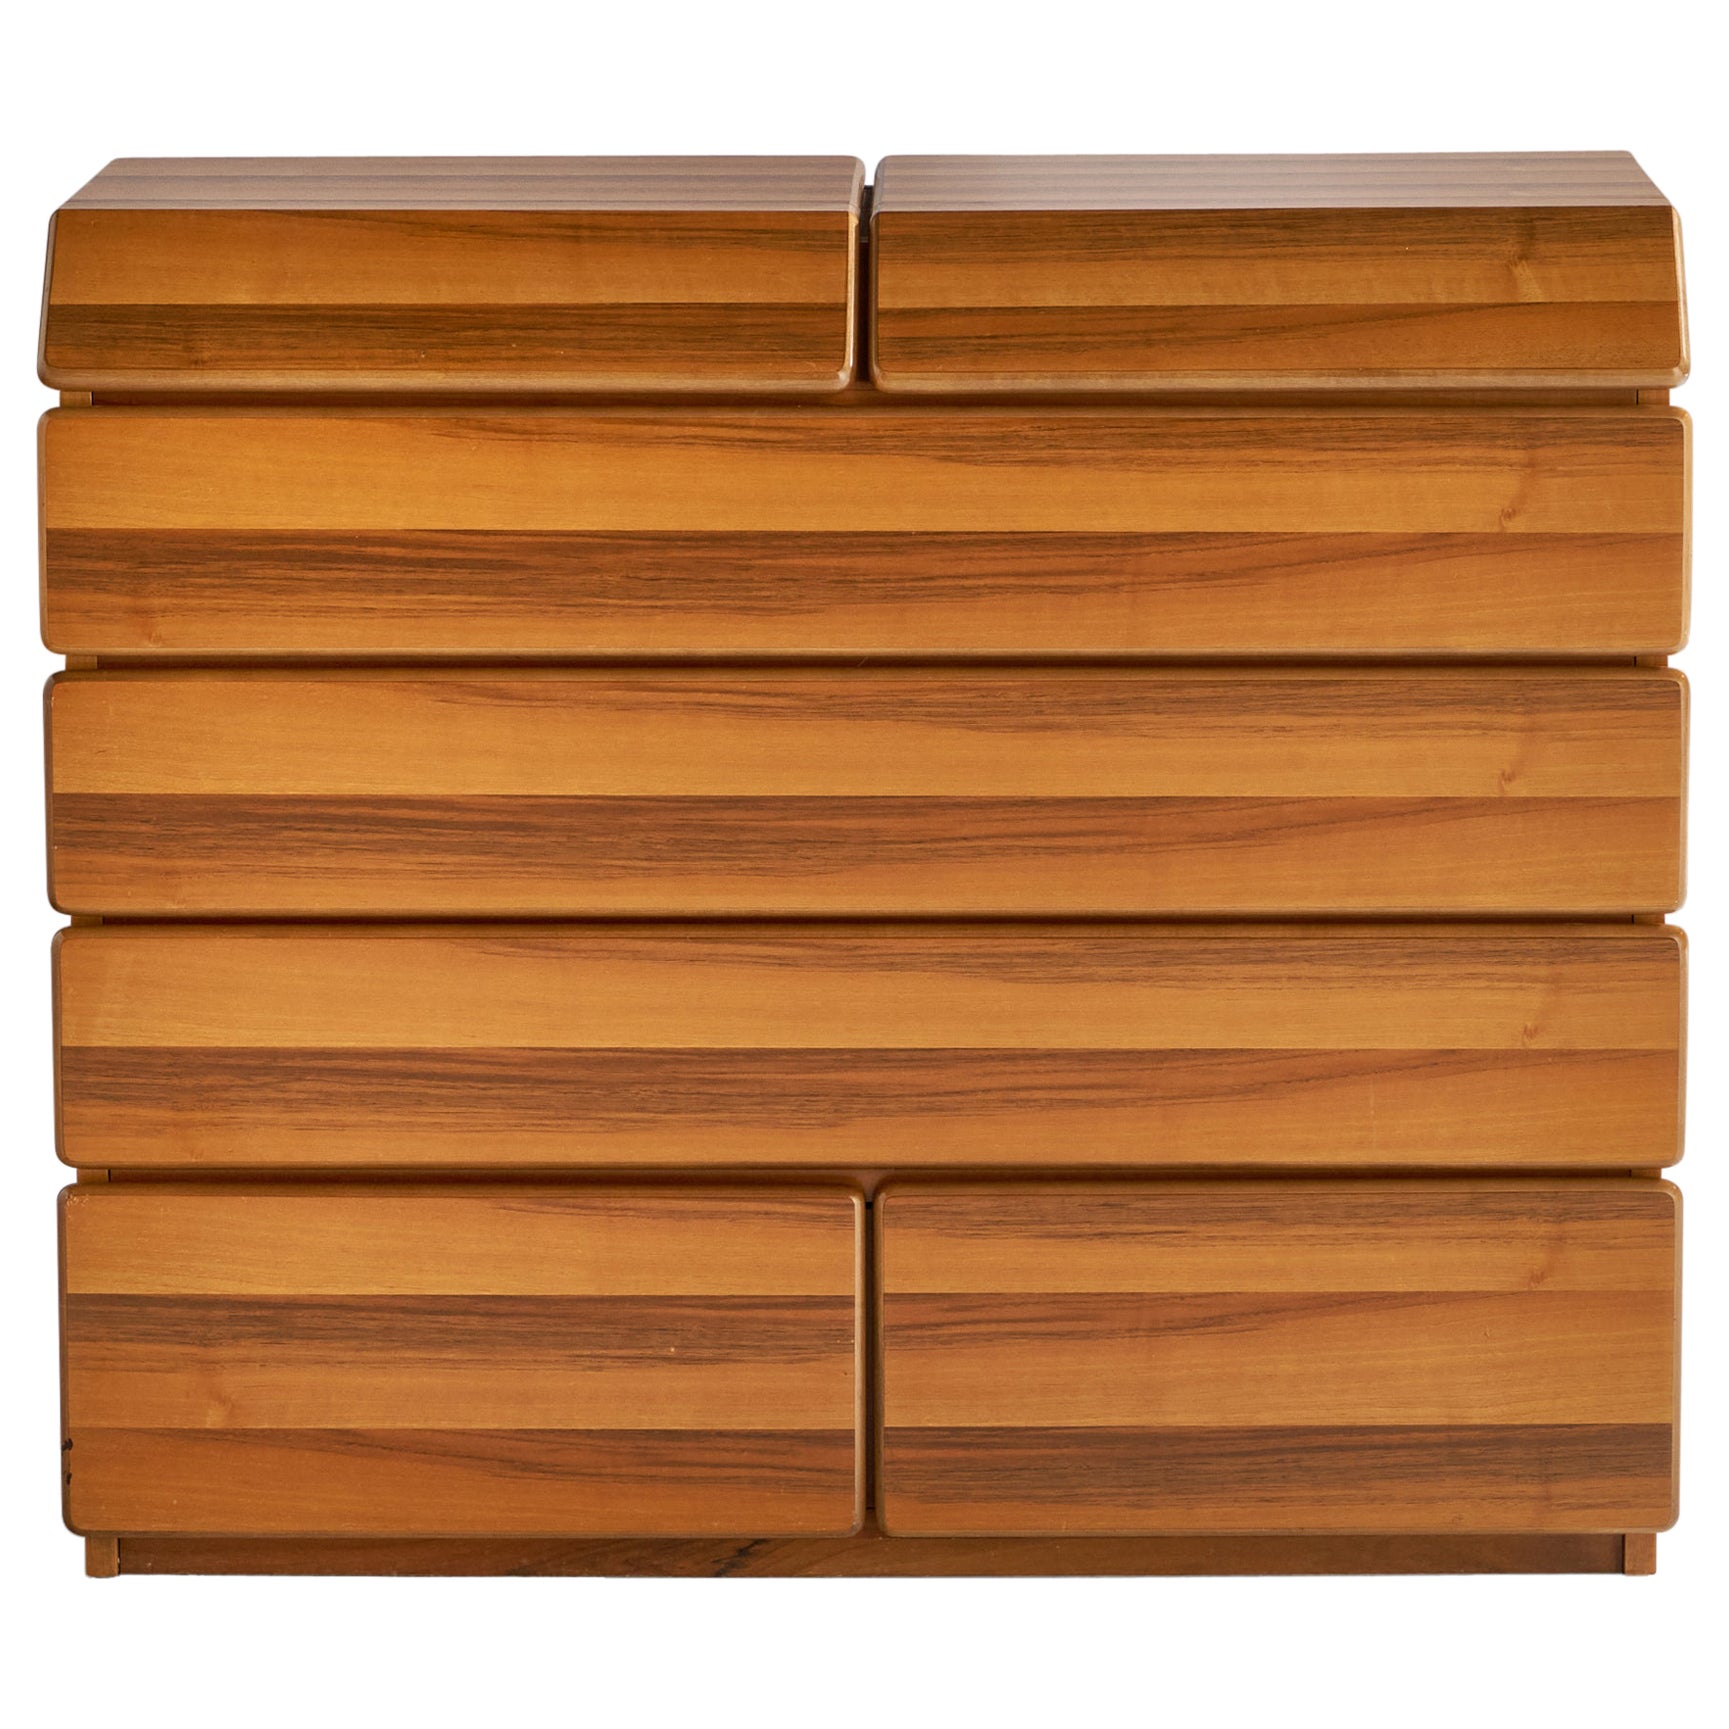 Mobilgirgi, Chest of Drawers, Spalting Wood, Italy, 1970s